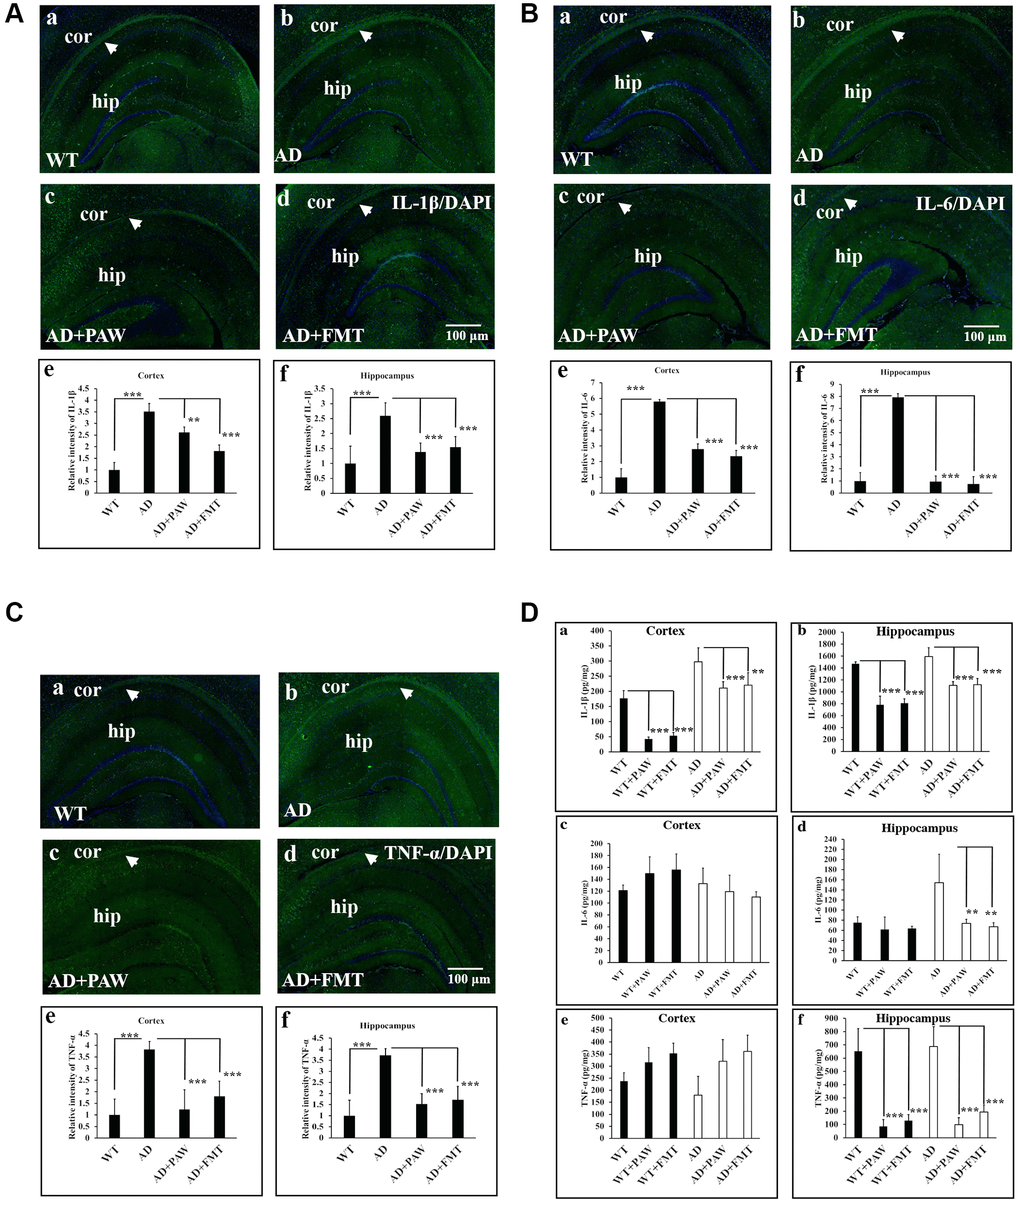 Inflammation marker analysis in the cortex (Cor) and hippocampus (Hip) of wild-type (WT) and AD mice. Immunofluorescence analysis of interleukin (IL)-1β (A), IL-6 (B), and tumor necrosis factor (TNF)-α (C) in the Cor and Hip of WT mice (a), AD mice (b), plasmin-activated water (PAW)-fed (AD+PAW) mice (c), and fecal microbiota transplantation (FMT) AD mice (AD+FMT) (d). Statistical results were analyzed in the Cor (e) and Hip (f) from (A), (B), and (C). (D) Protein concentrations of IL-1β (a, b), IL-6 (c, d), and TNF-α (e, f) from the Cor and Hip were measured by ELISA of WT, WT+PAW, WT+FMT, AD, AD+PAW, and AD+FMT mice. All results were analyzed by ANOVA with a post hoc analysis. (*p **p ***p 